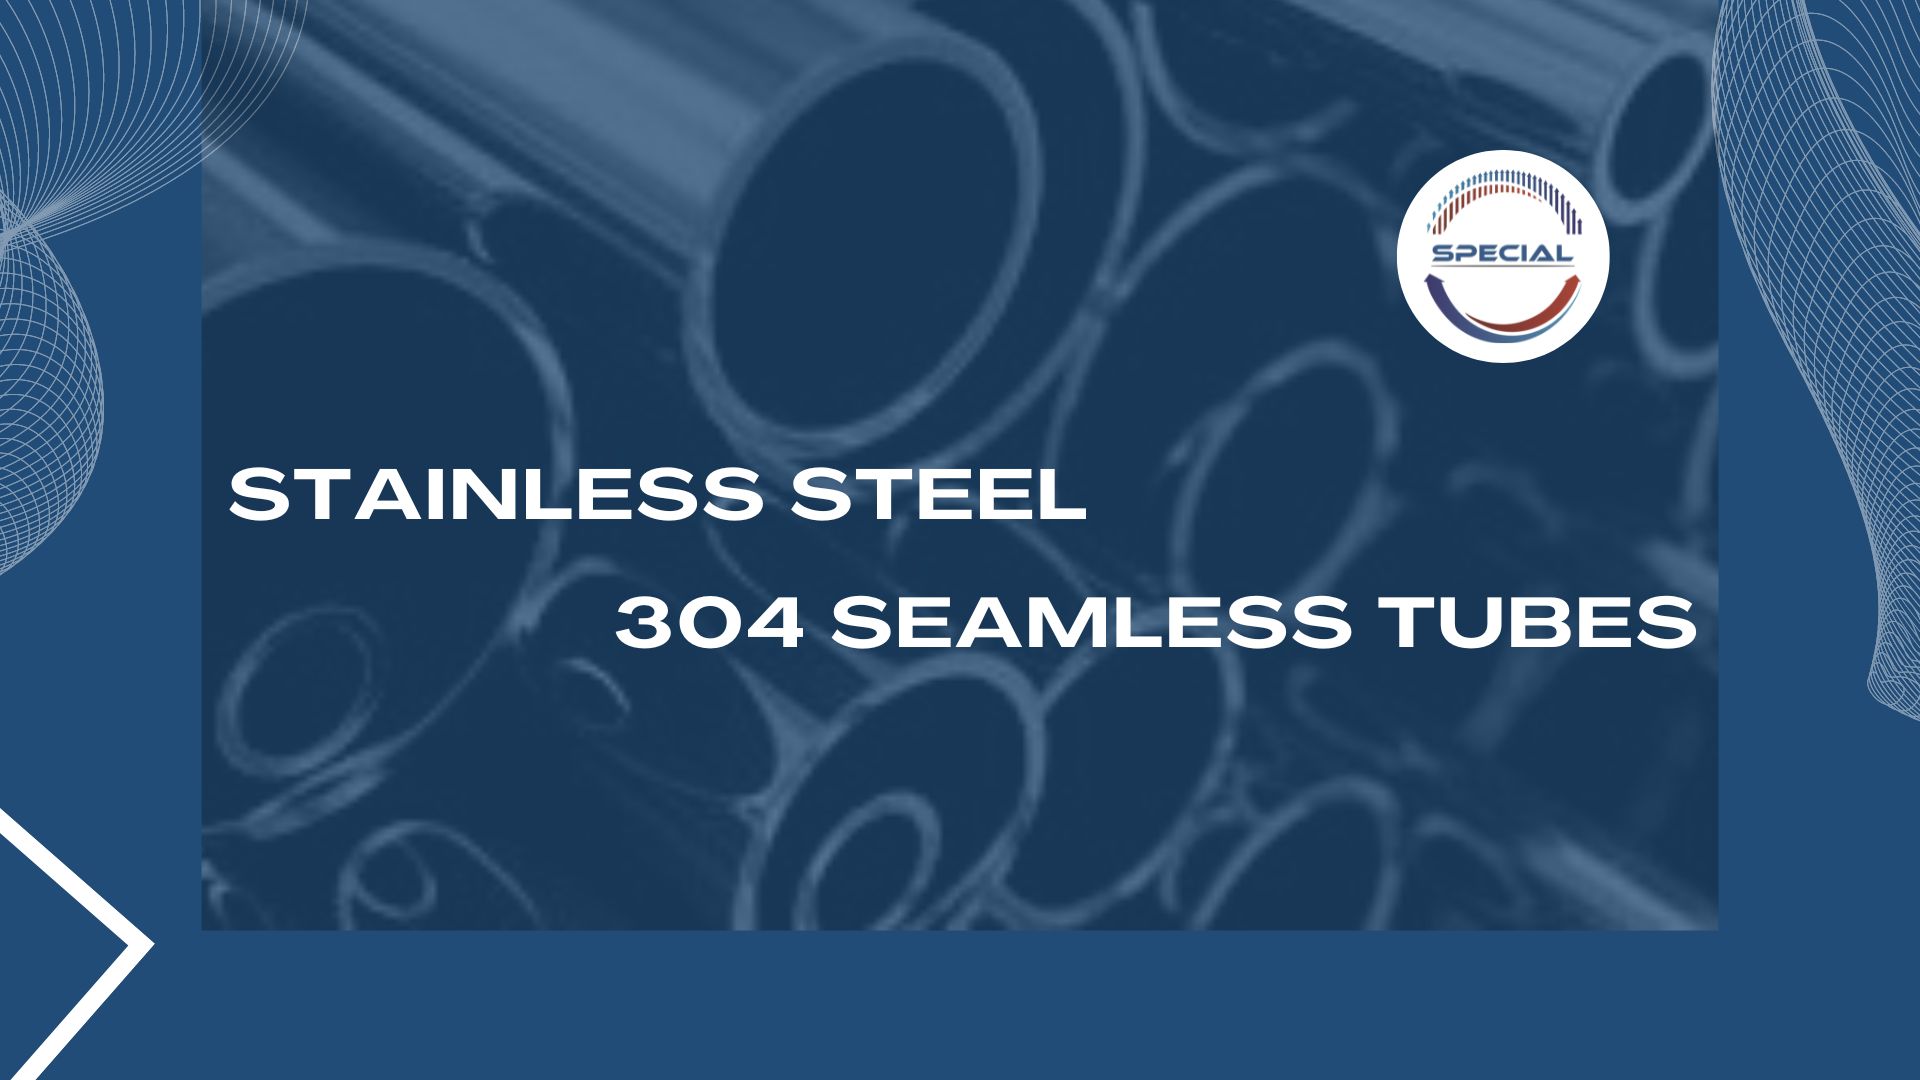 Stainless Steel 304 Seamless Tubes manufacturer